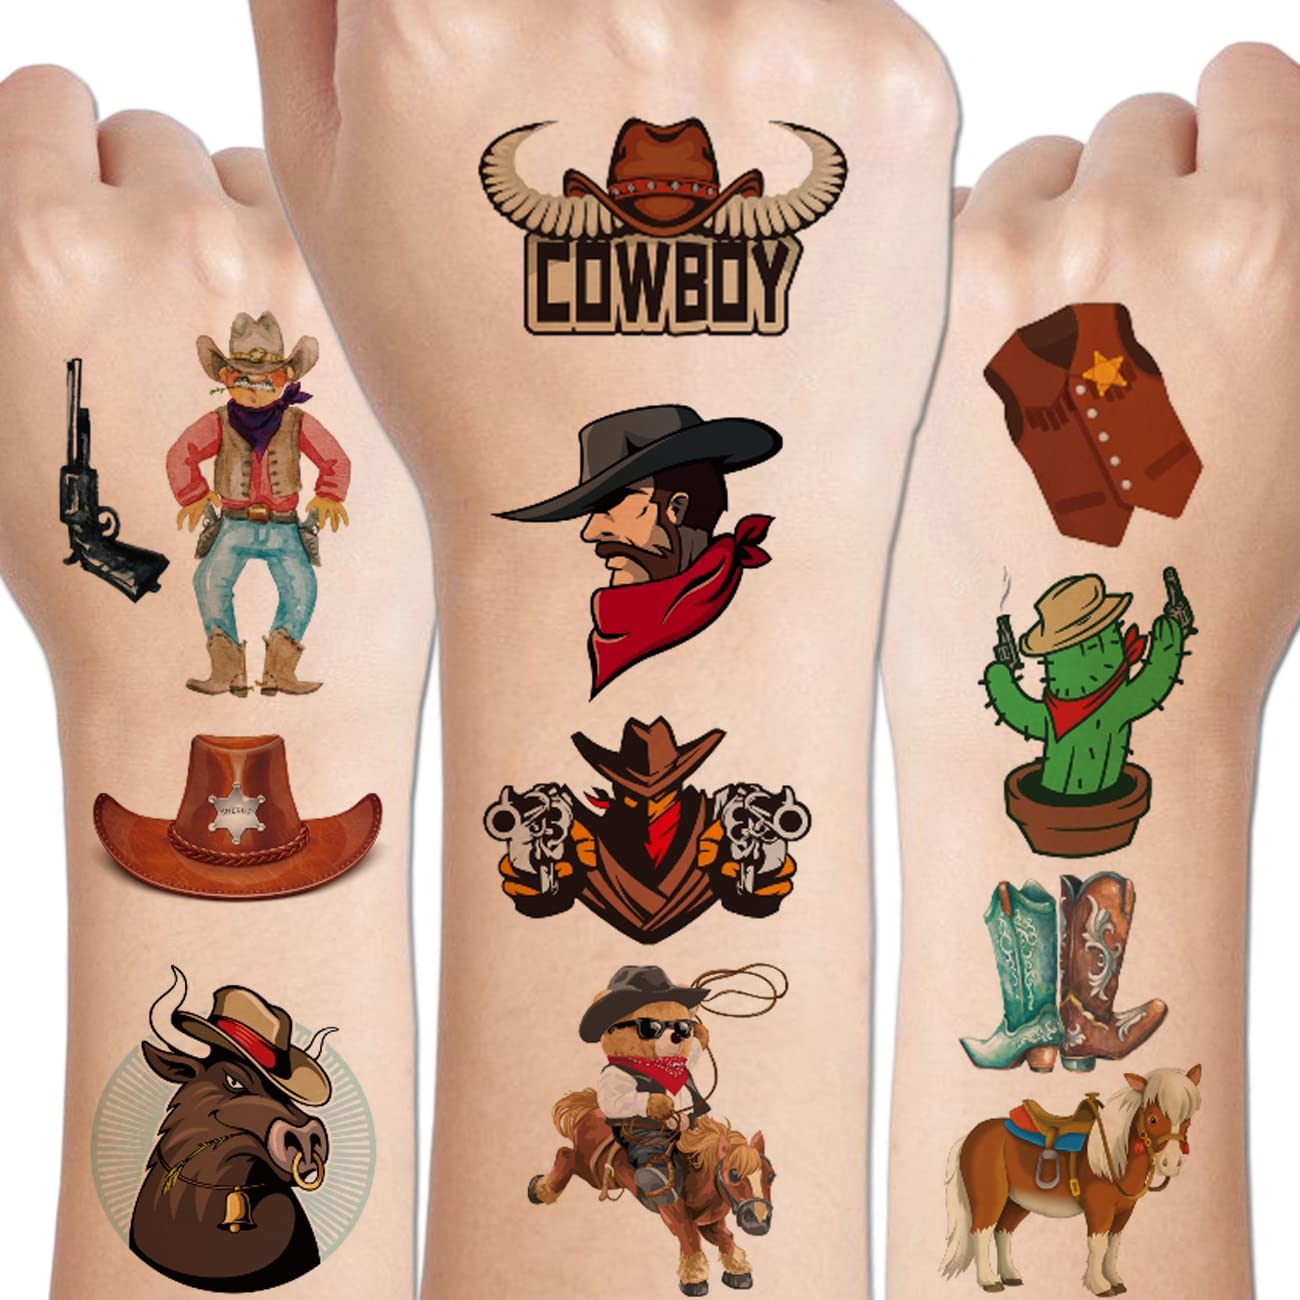 CHARLENT Cowboy Temporary Tattoos for Kids - 100 PCS Western Cowboy Temporary Tattoos for Boys Birthday Party Favors Goodie Bag Fillers